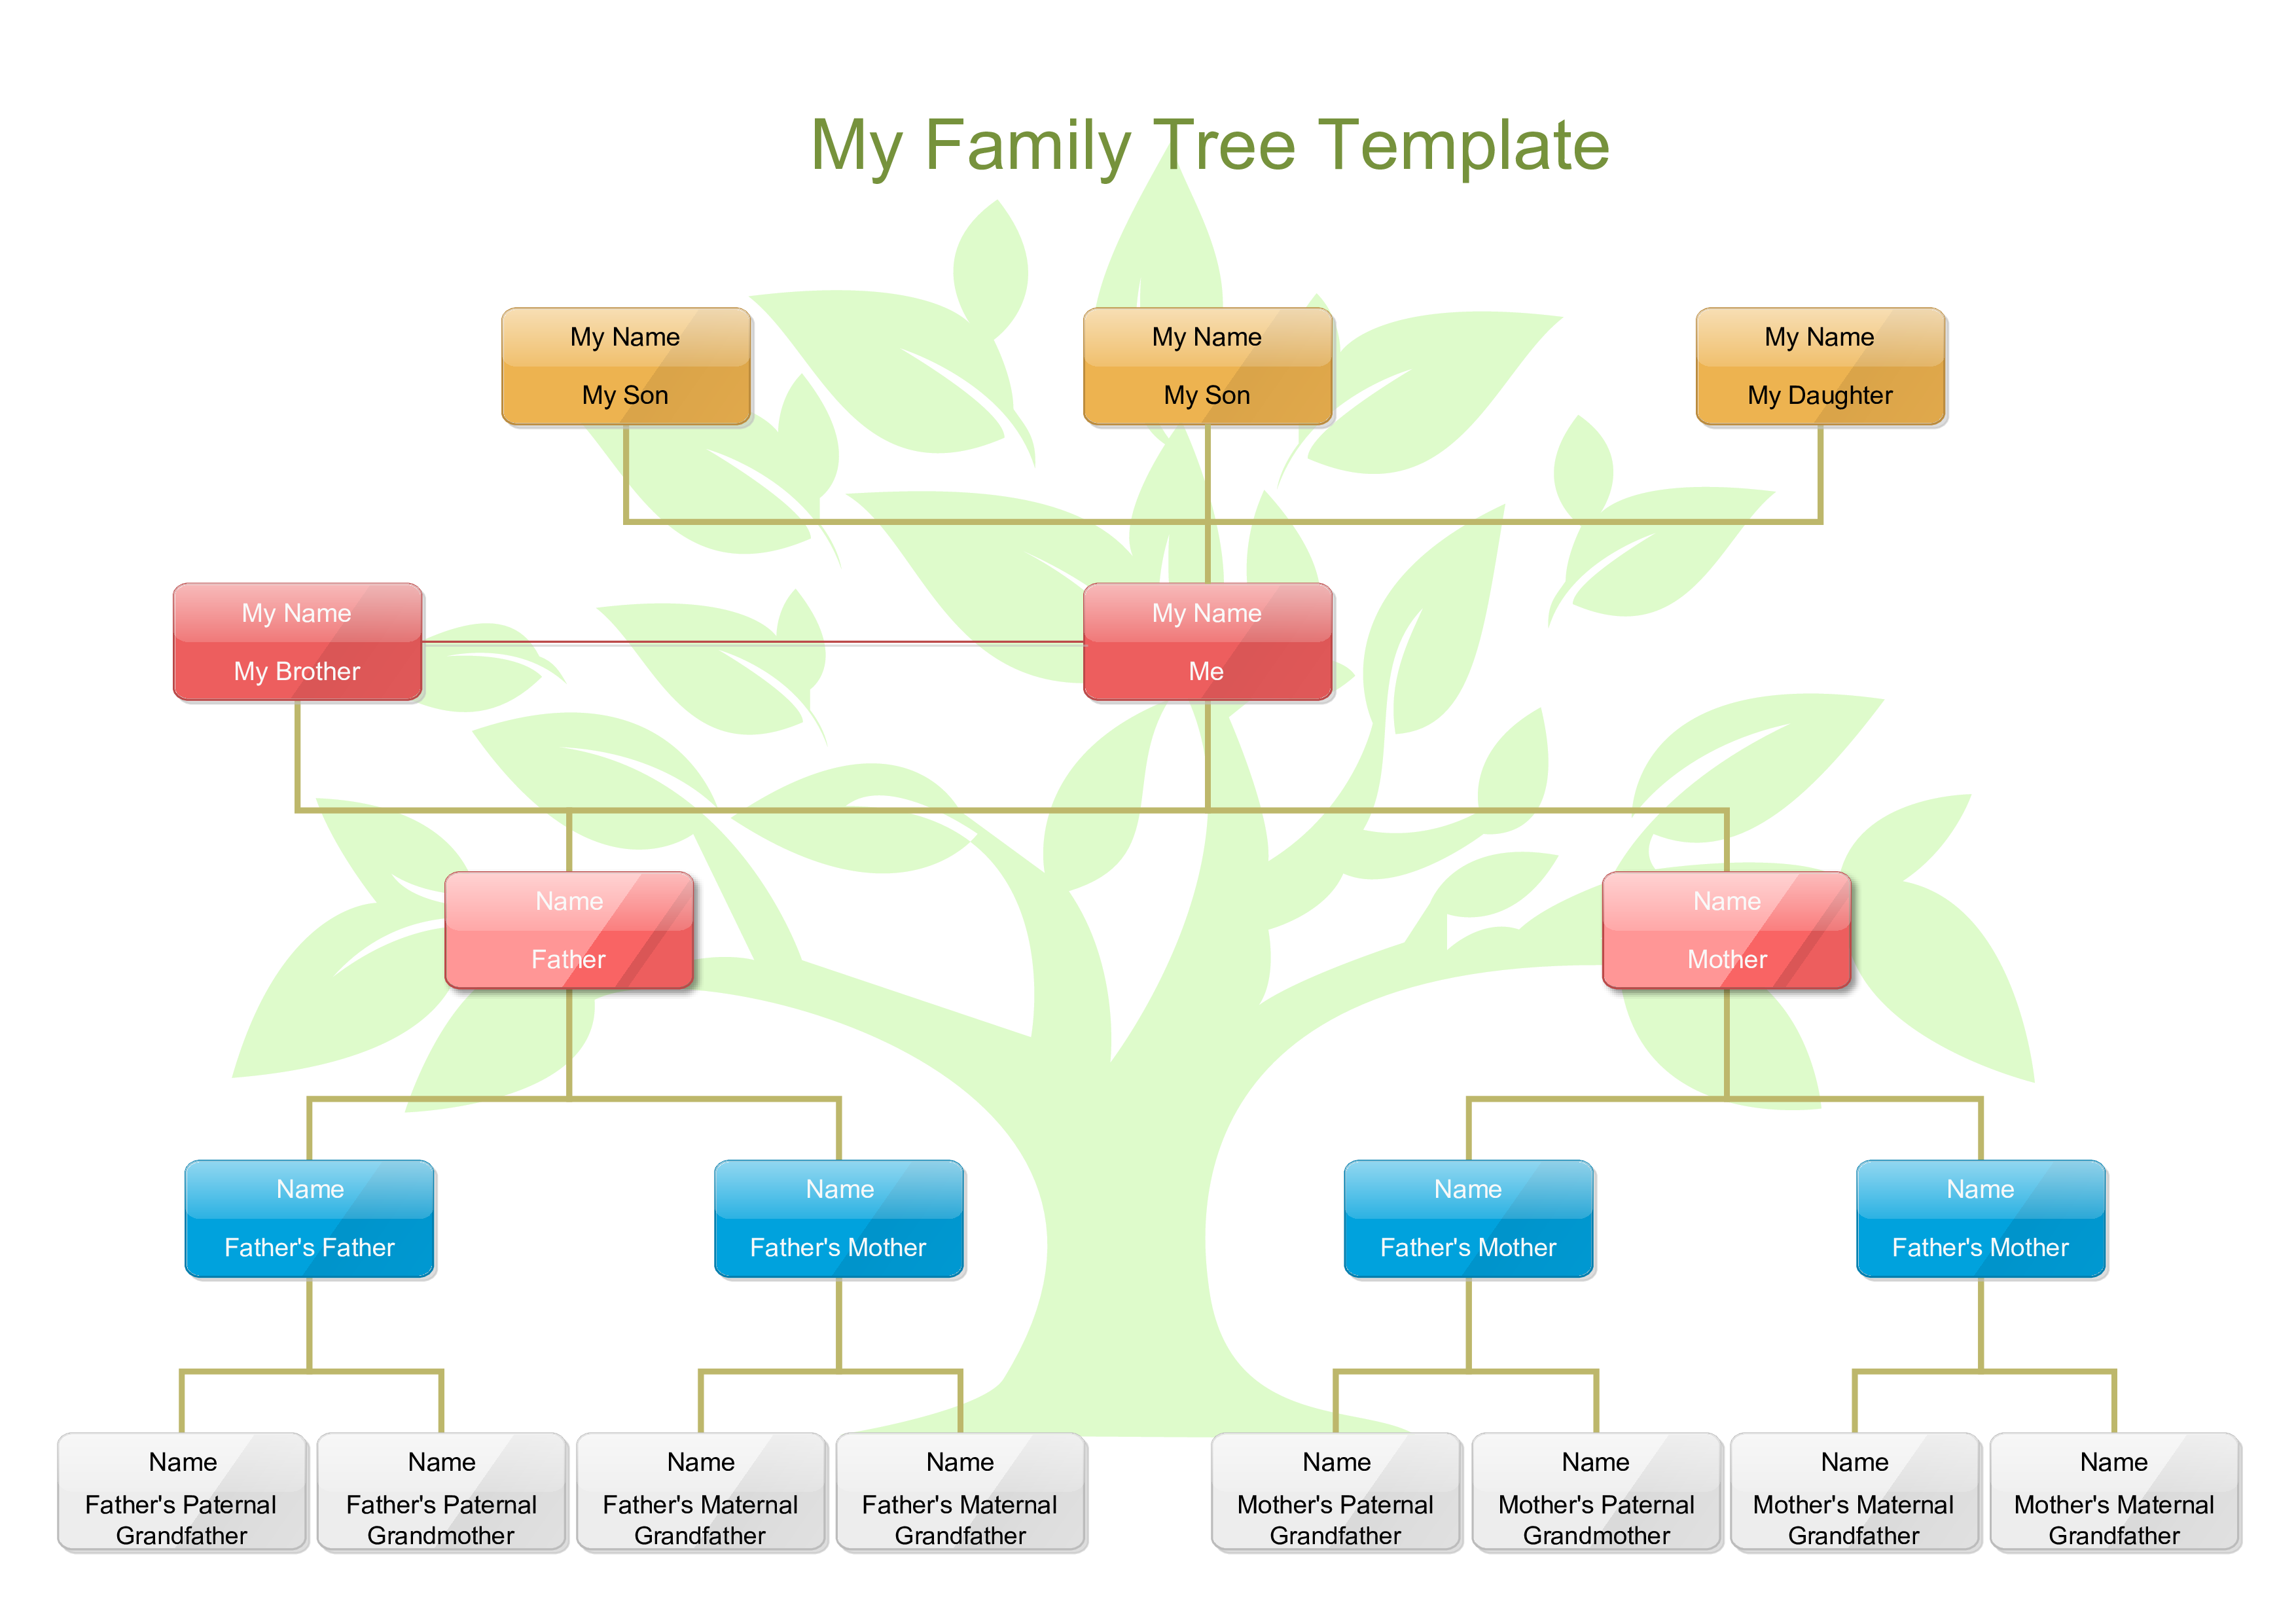 My Family Tree Template For Kids Templates At Allbusinesstemplates